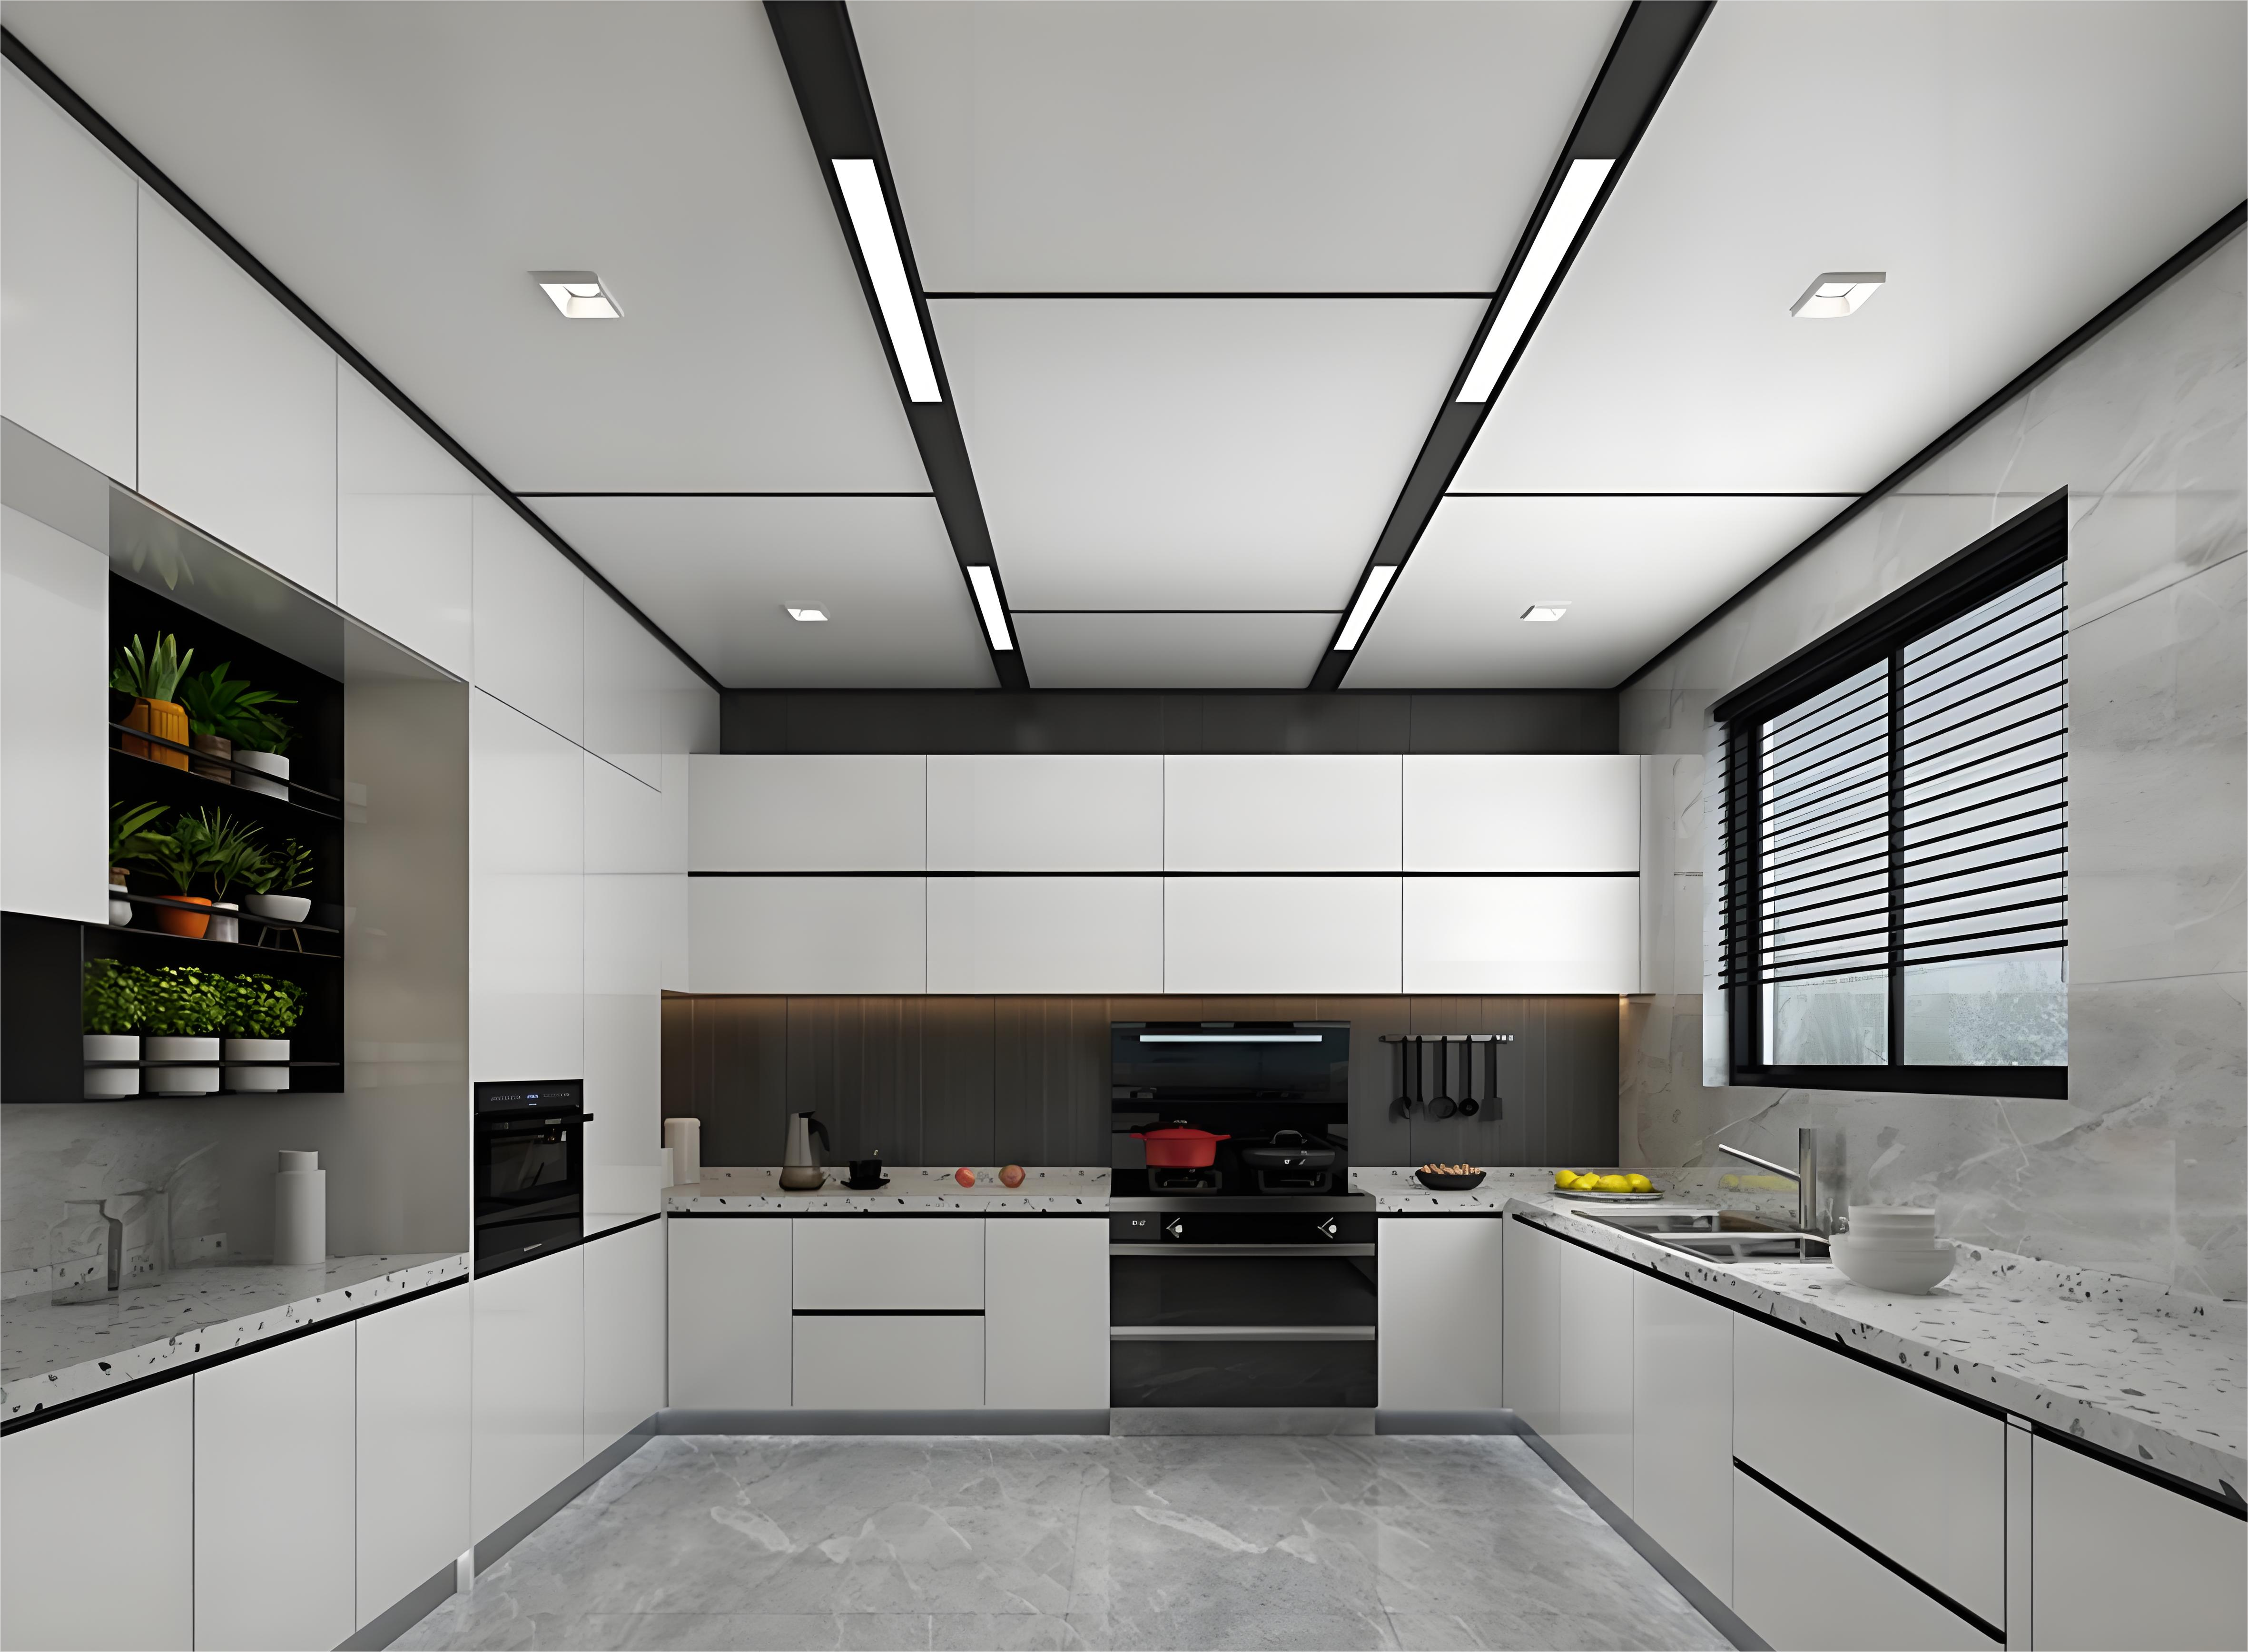 Transform Your Kitchen with Aluminum Honeycomb Panel